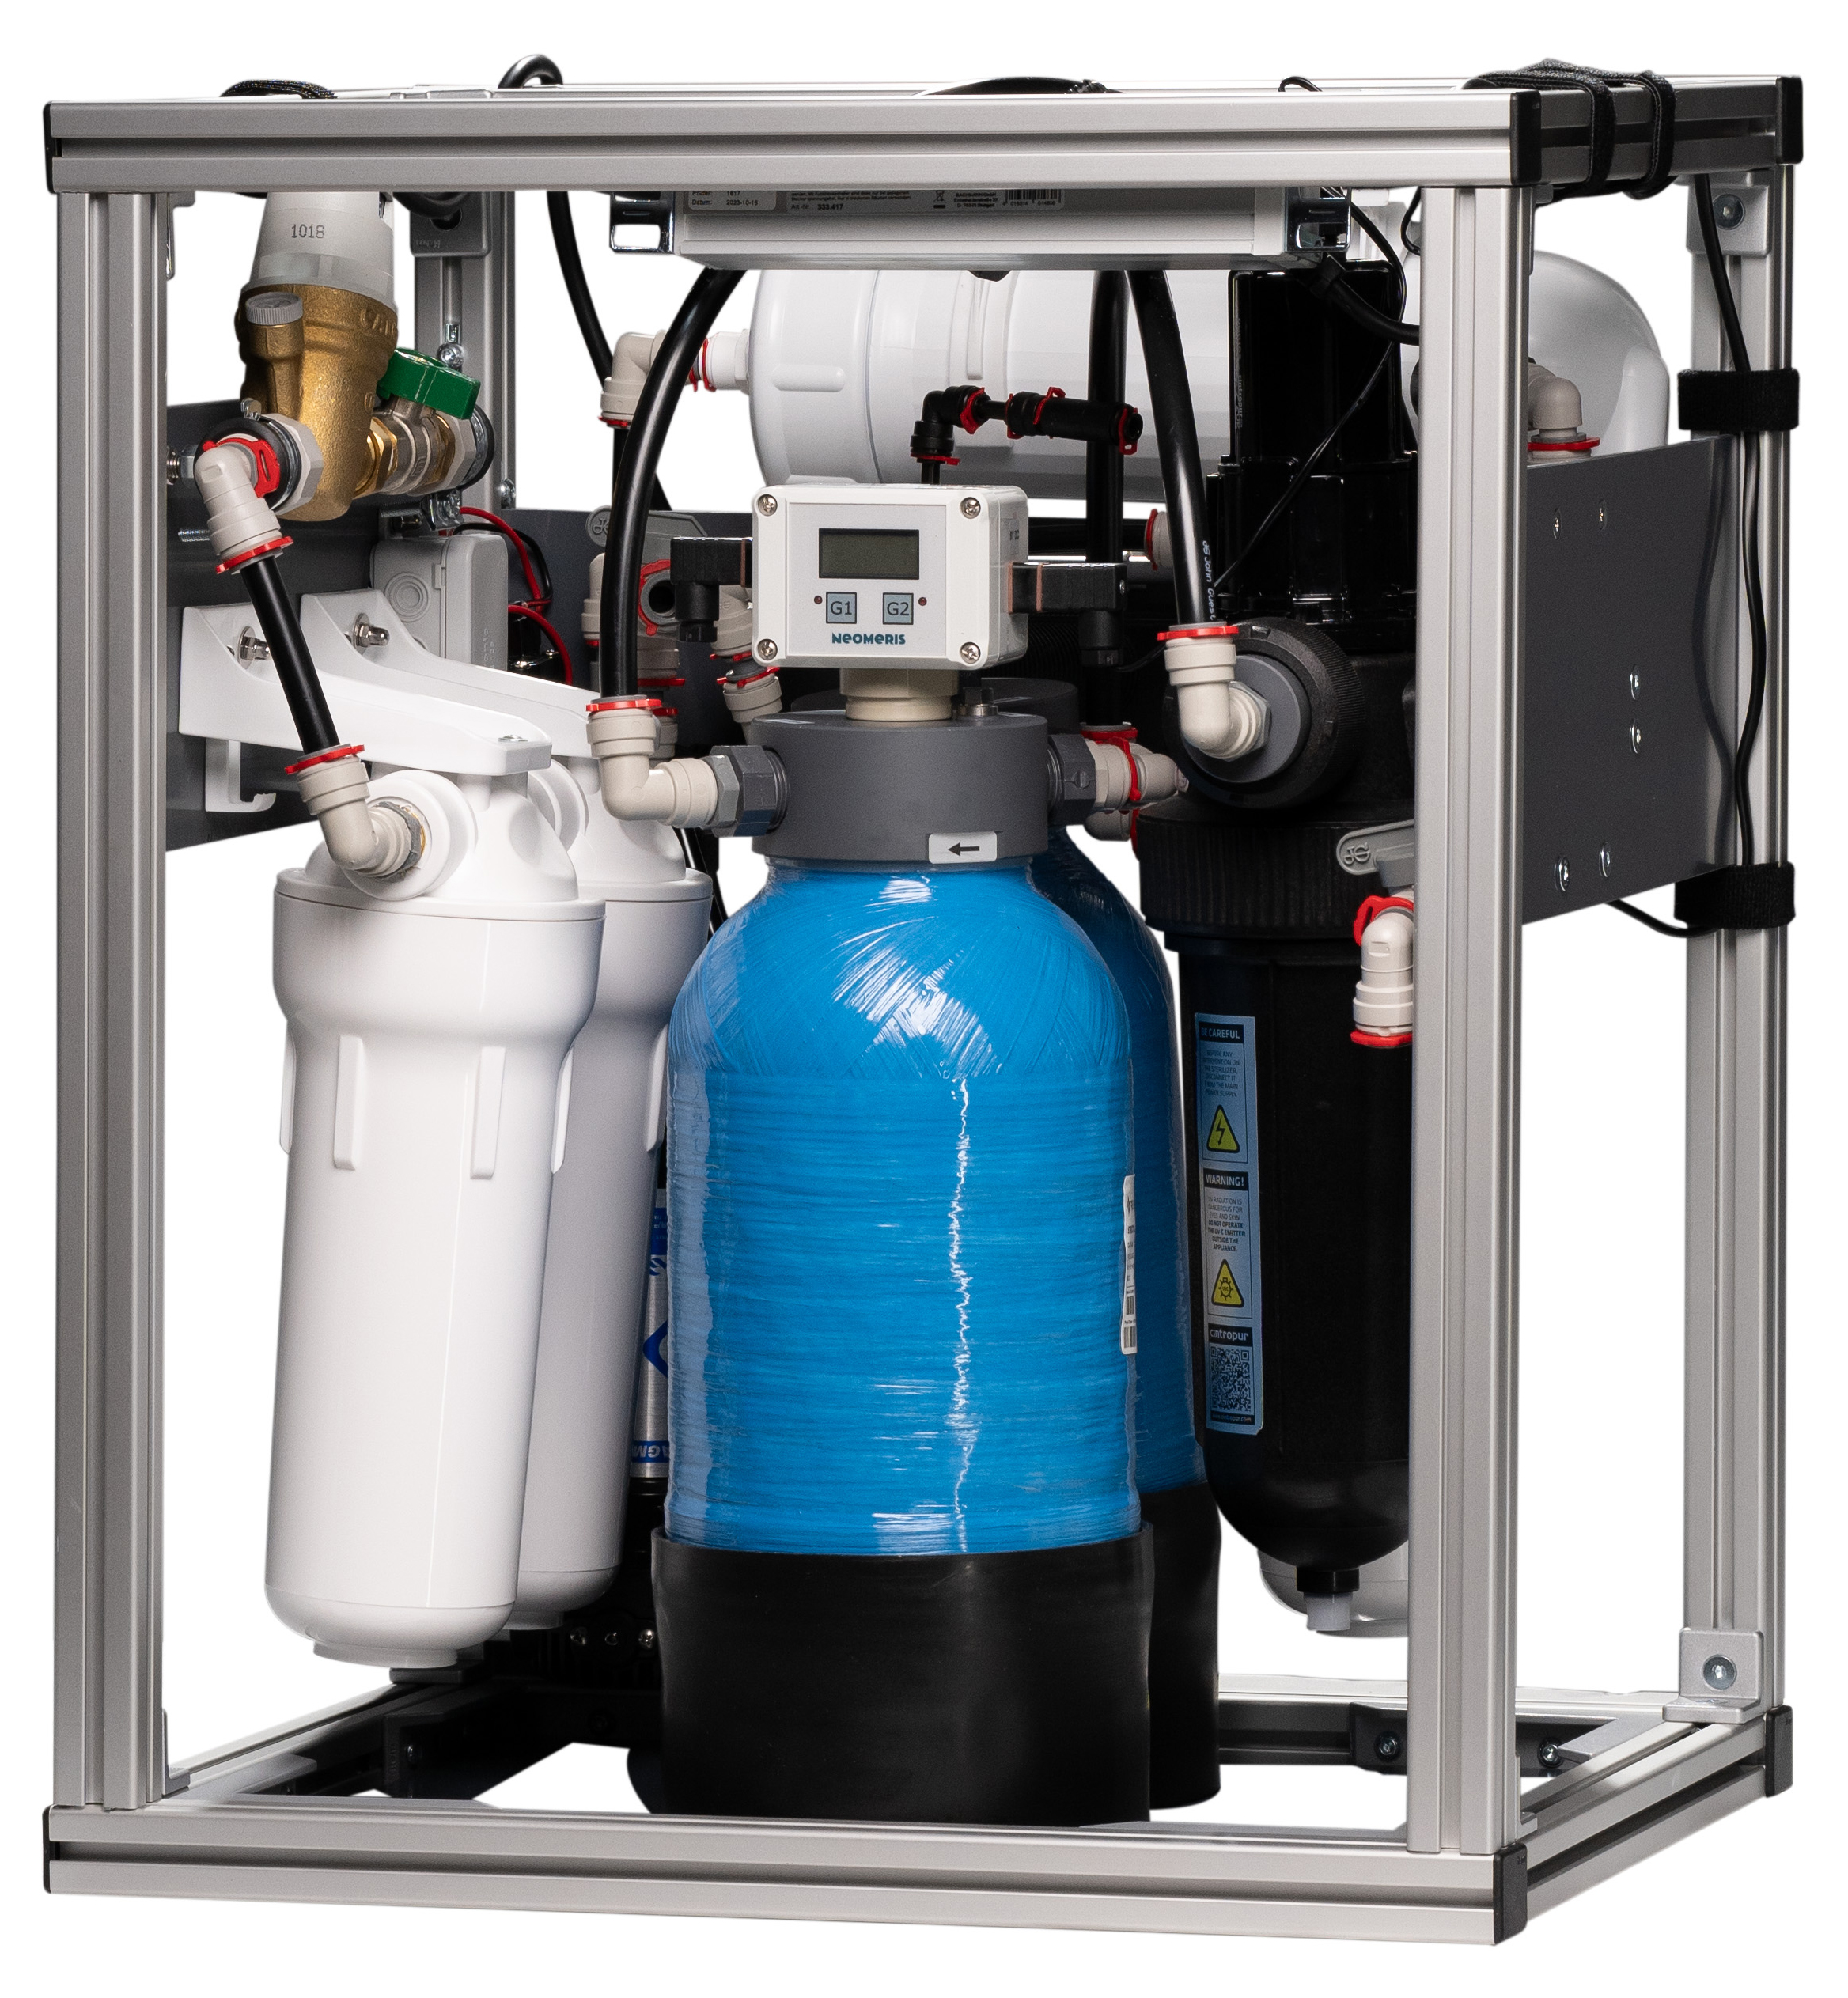 Water treatment system as an under-counter system for outpatient clinics; incl. UV system and pyrogen filter